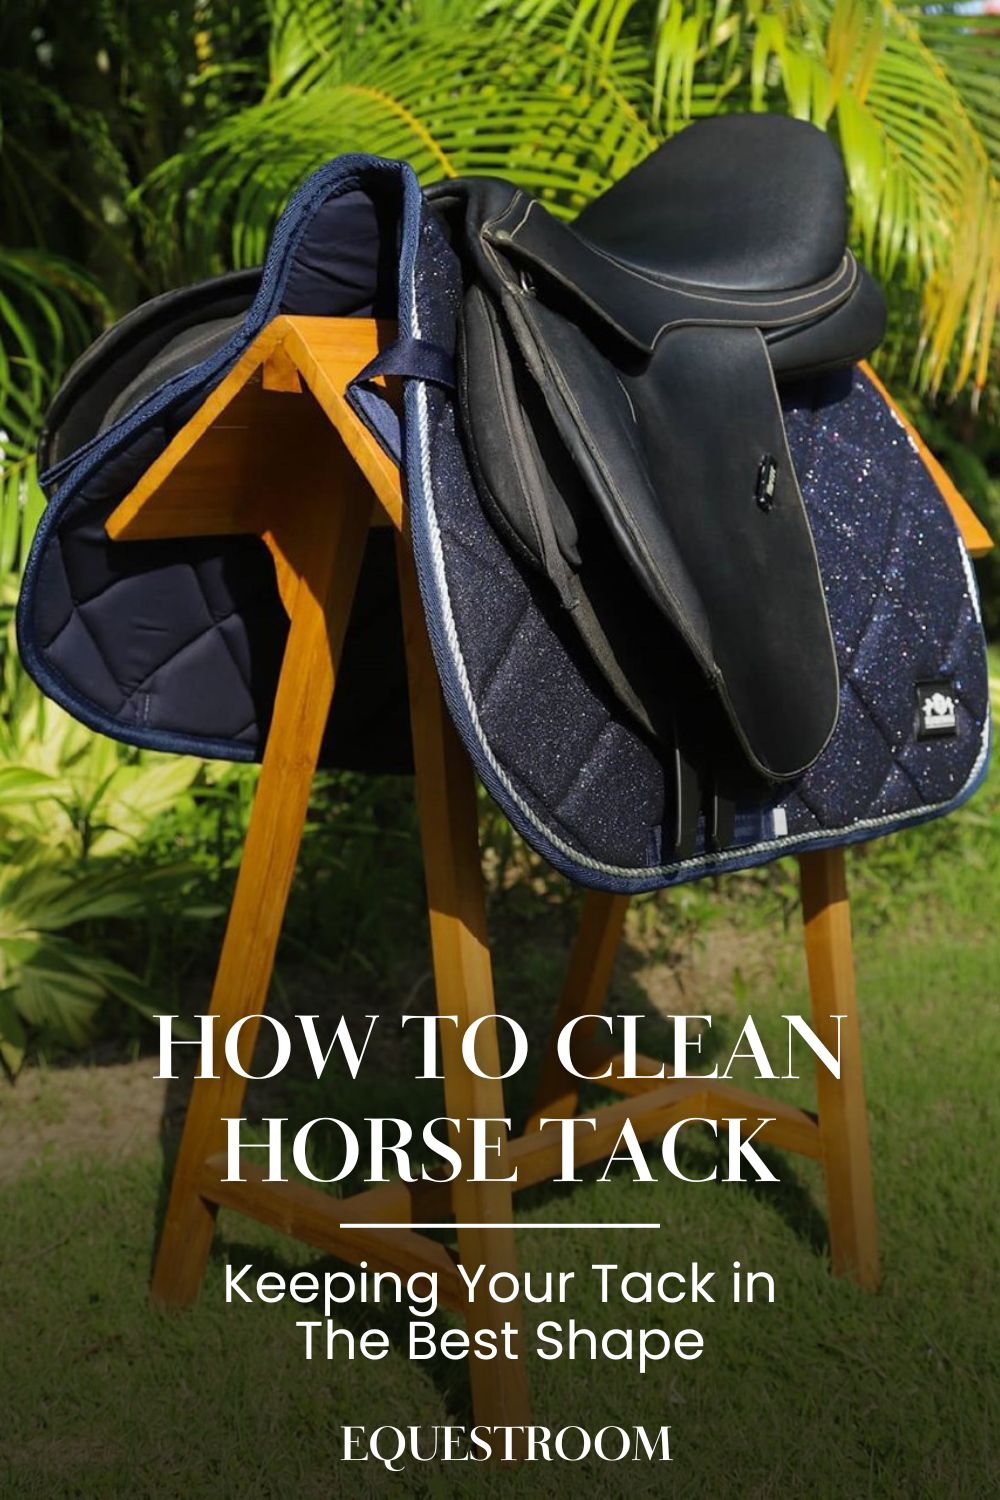 How To Clean Horse Tack